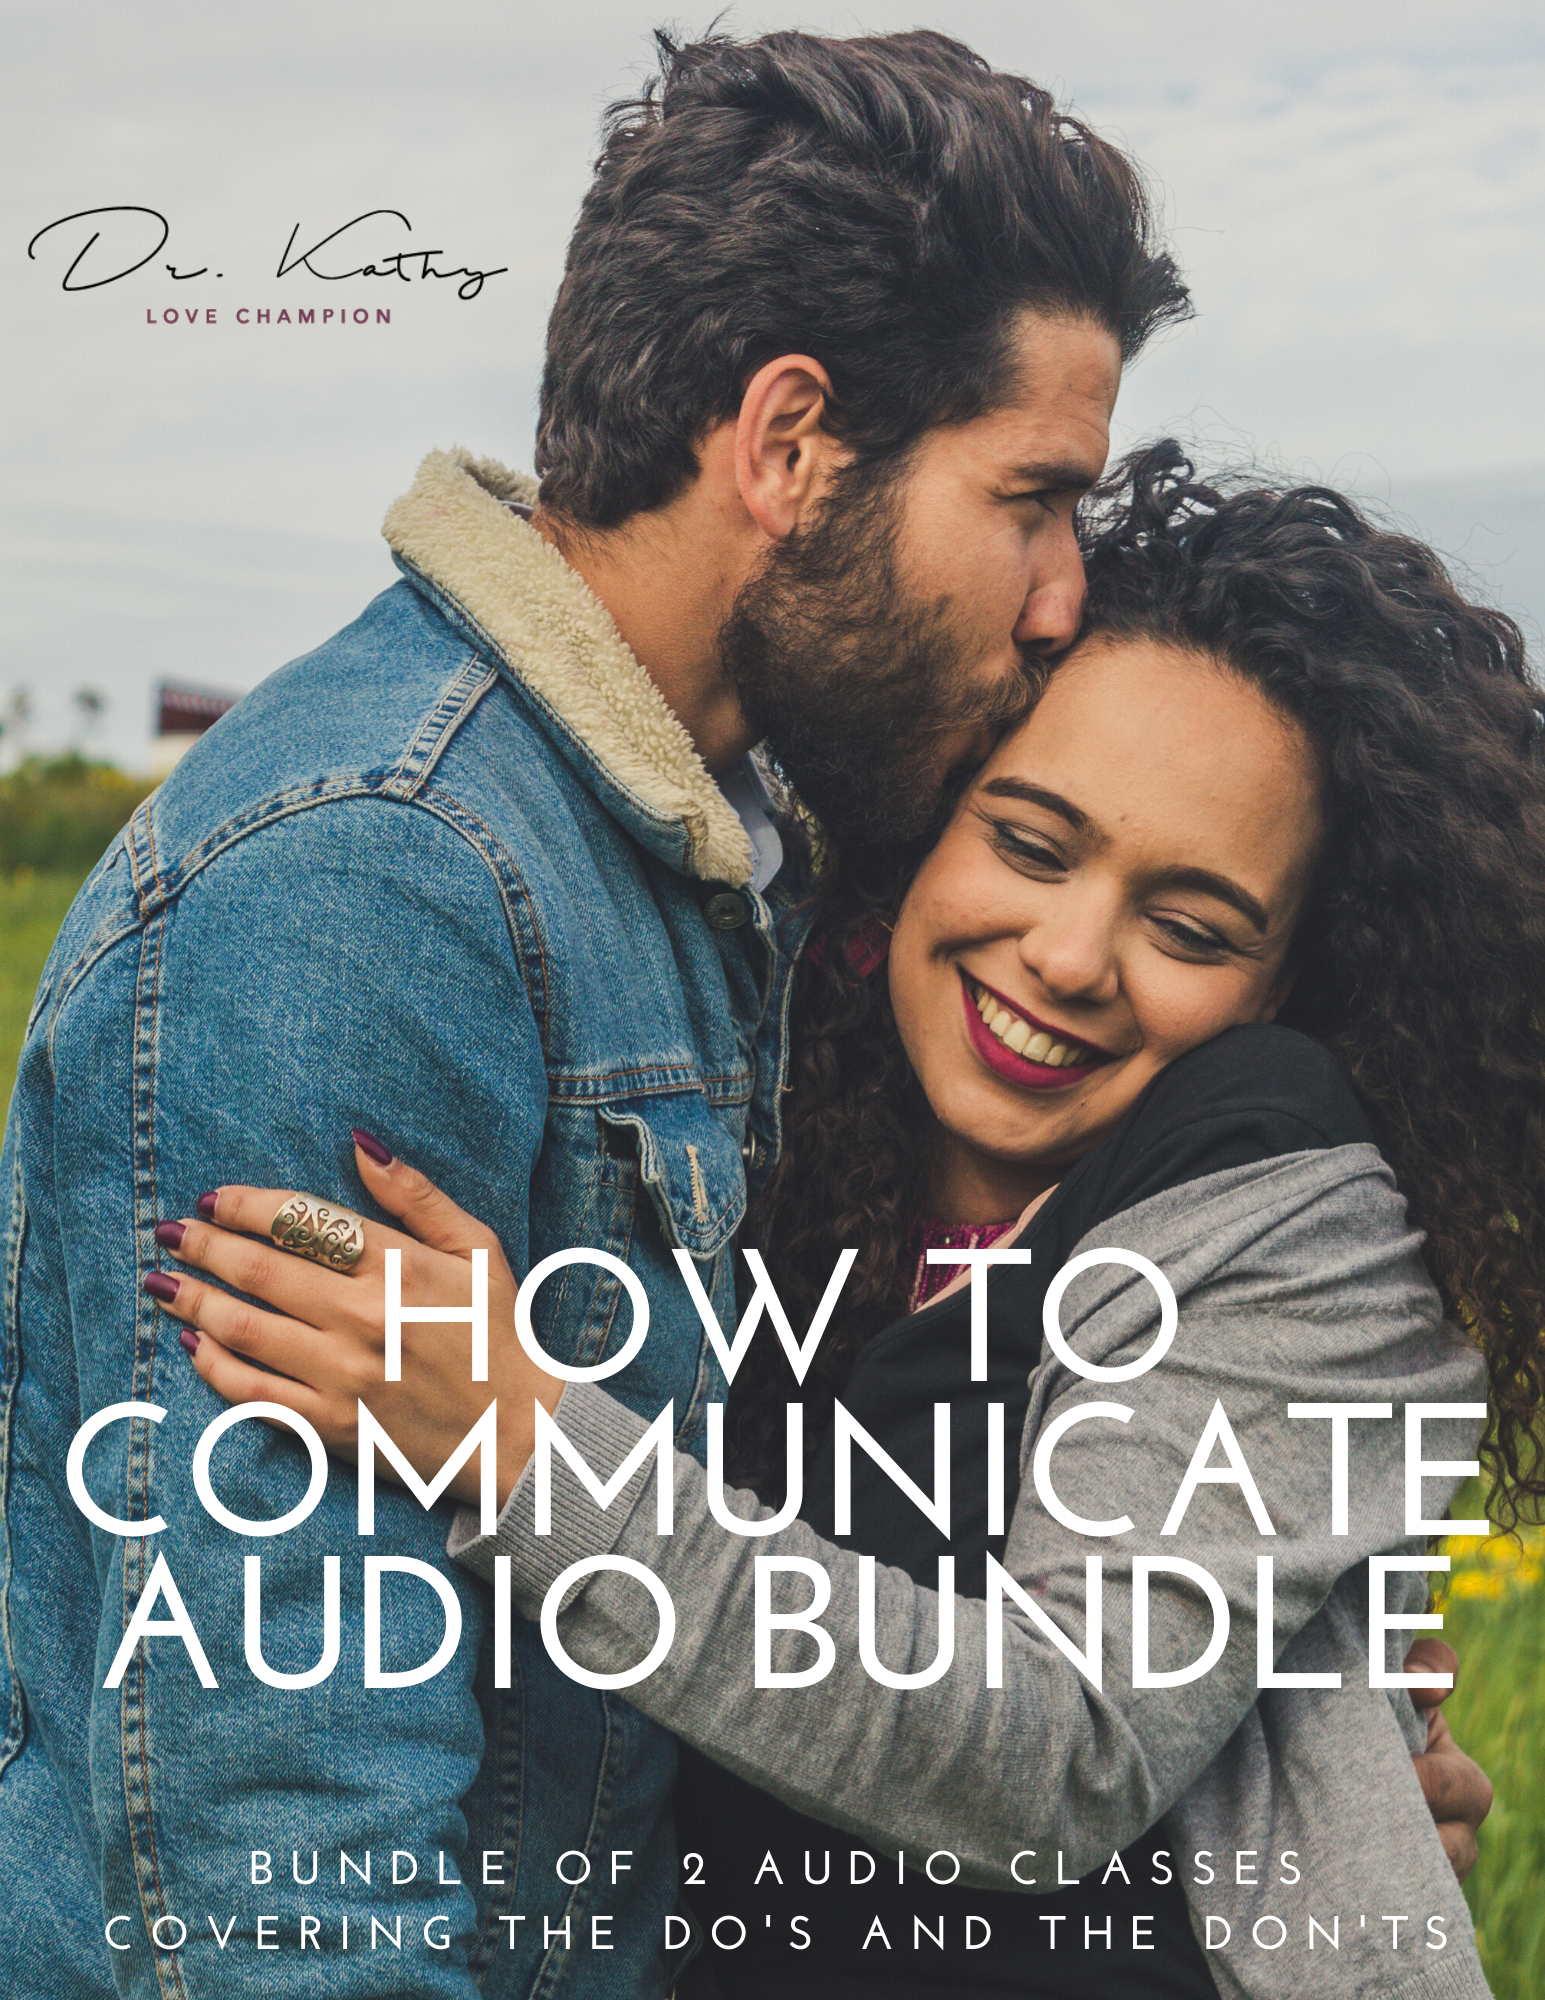 How To Communicate - Bundle of Both Audio Lessons